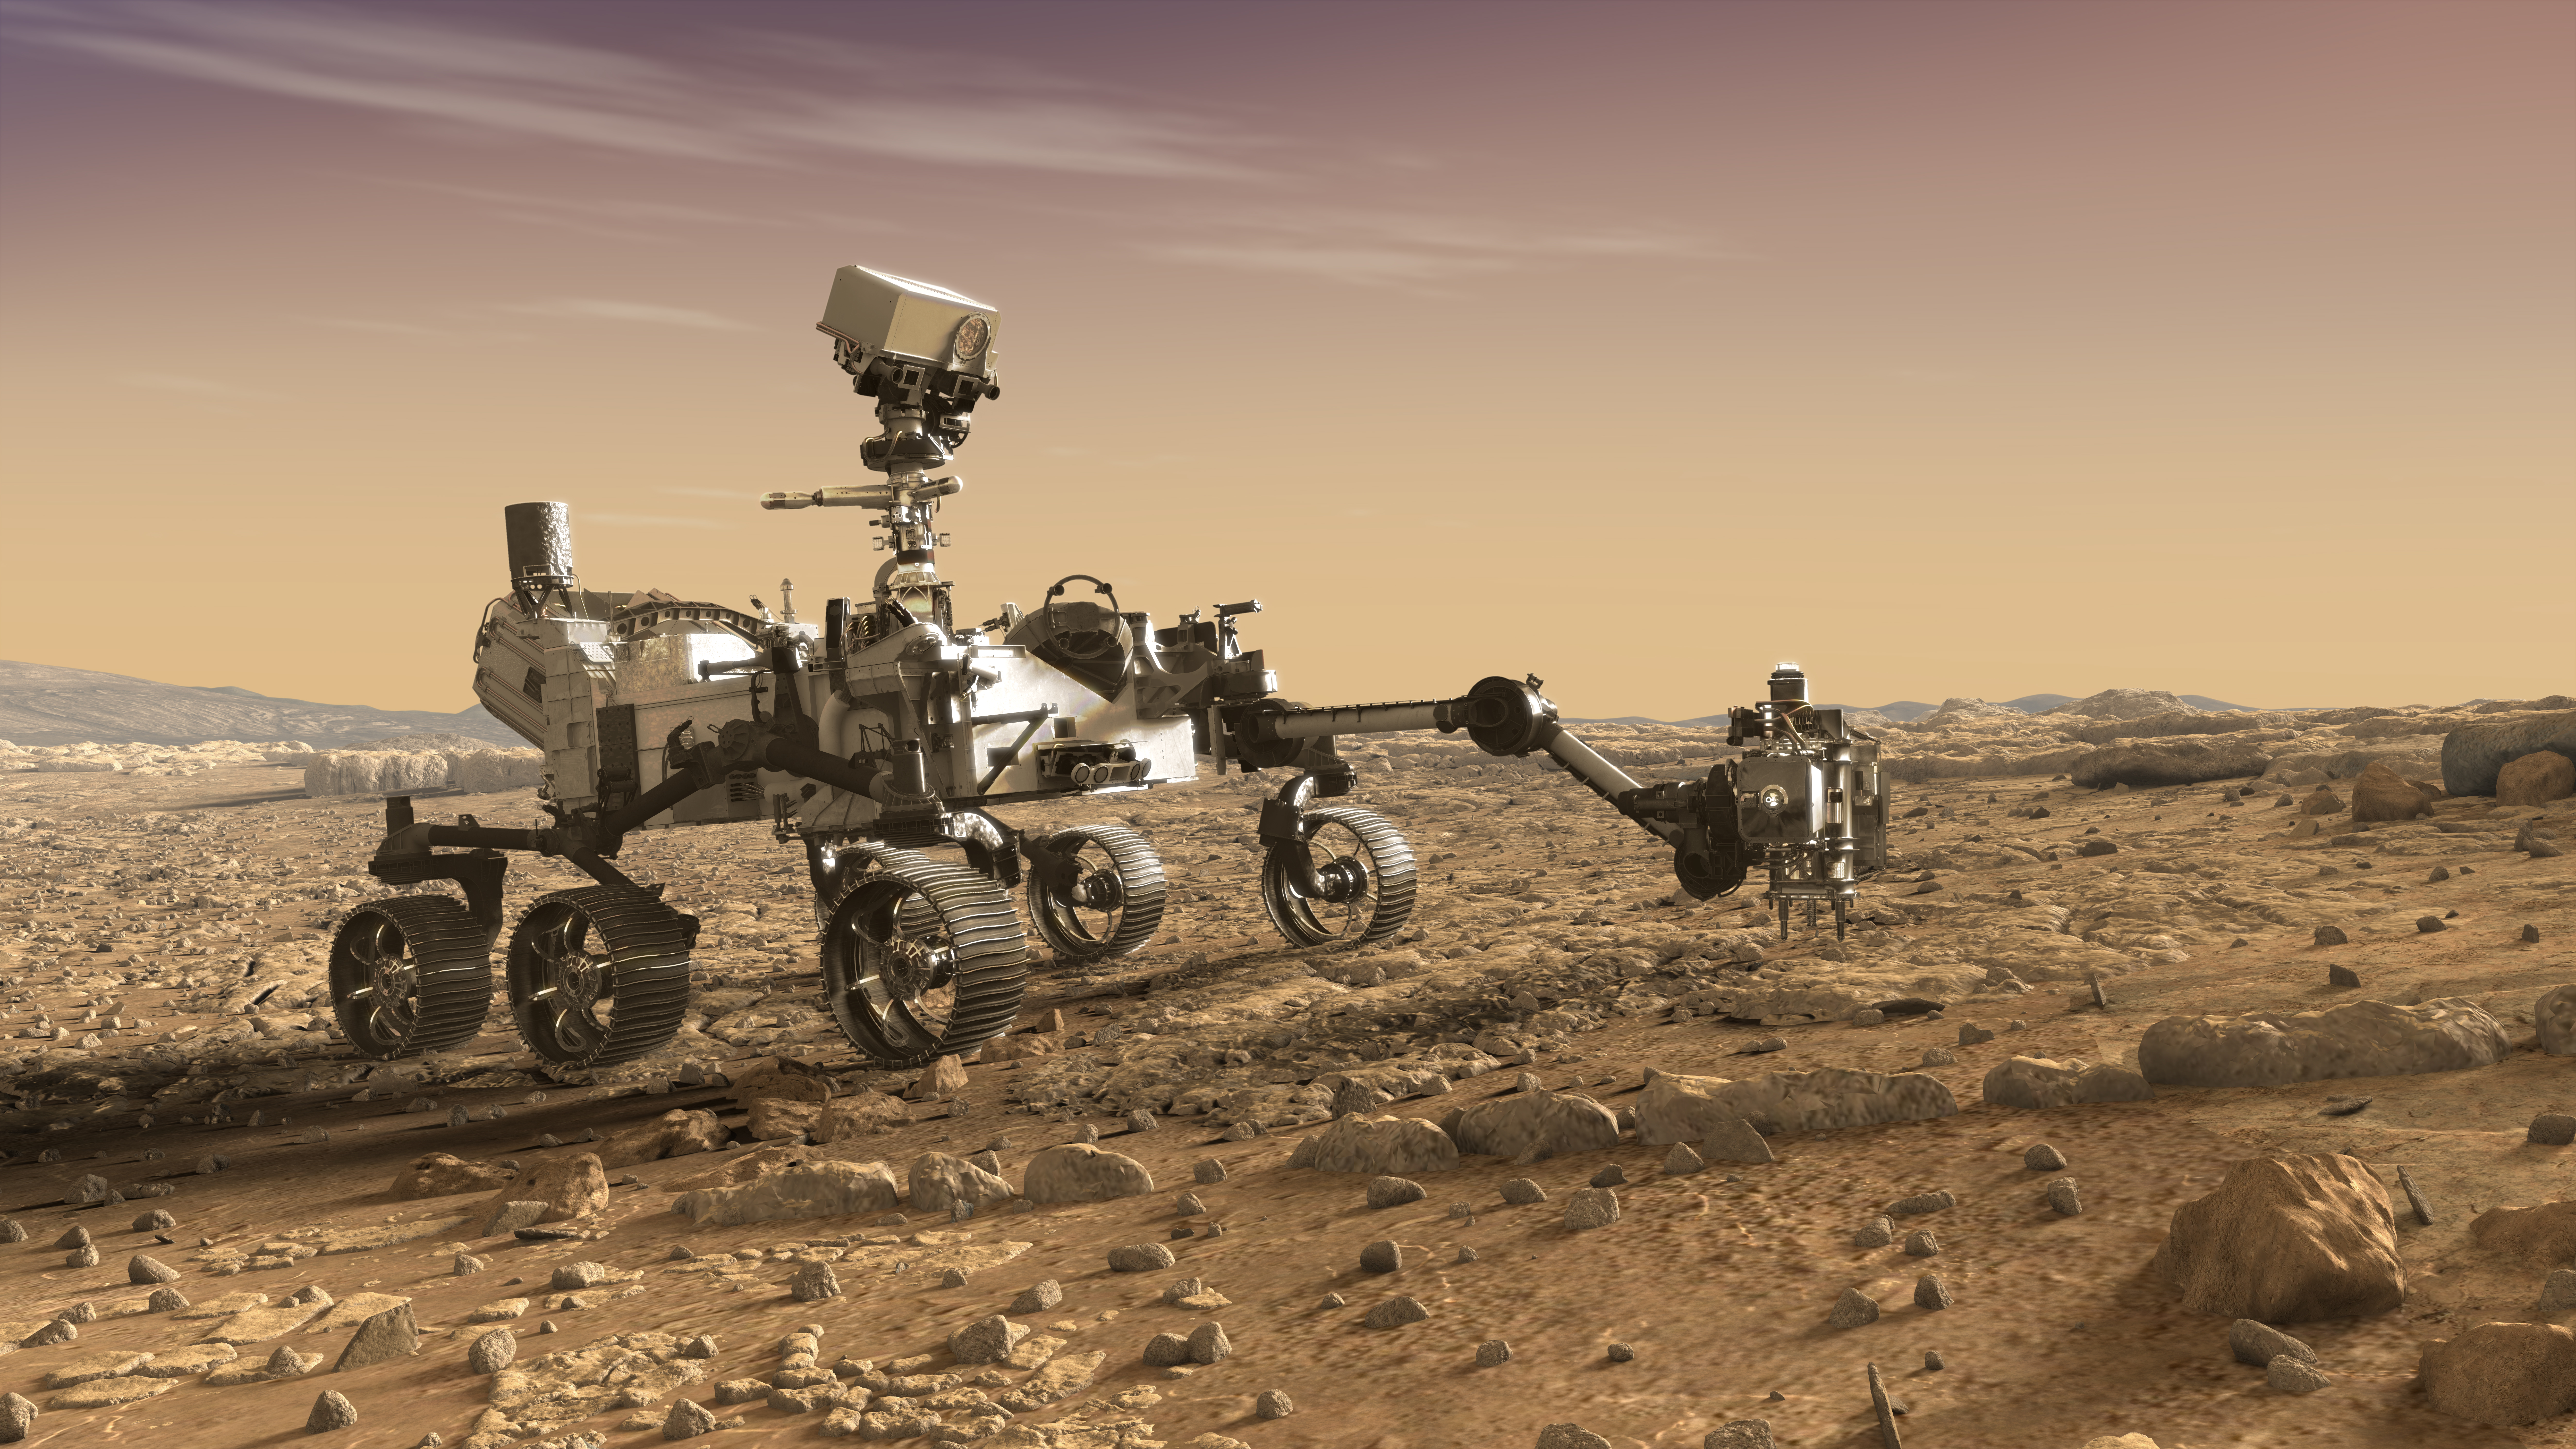 NASA to Brief Early Science from Perseverance Mars Rover